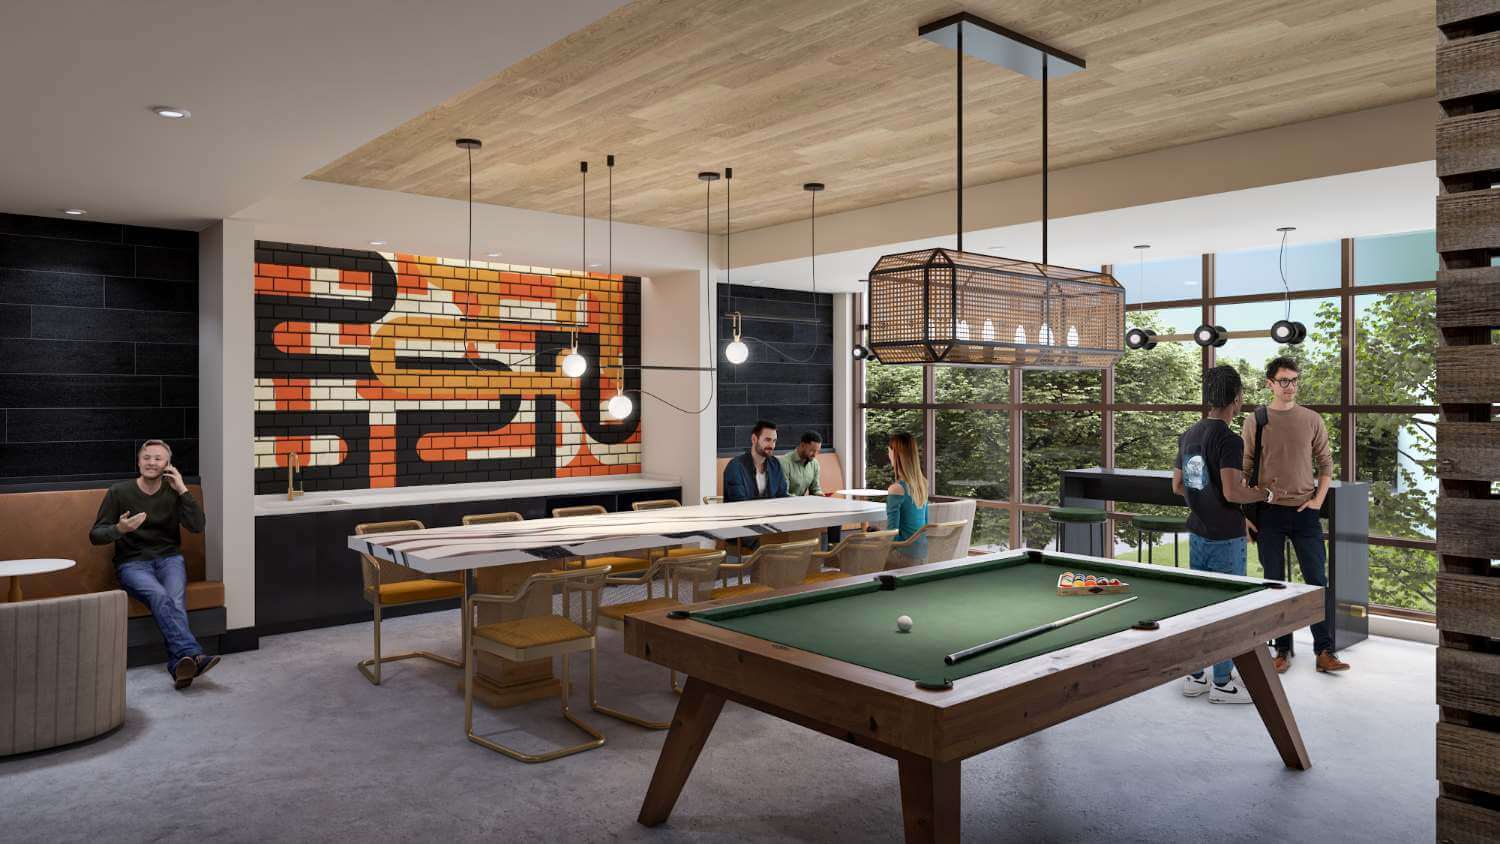 clubhouse with pool table, lounge seating, and floor to ceiling windows